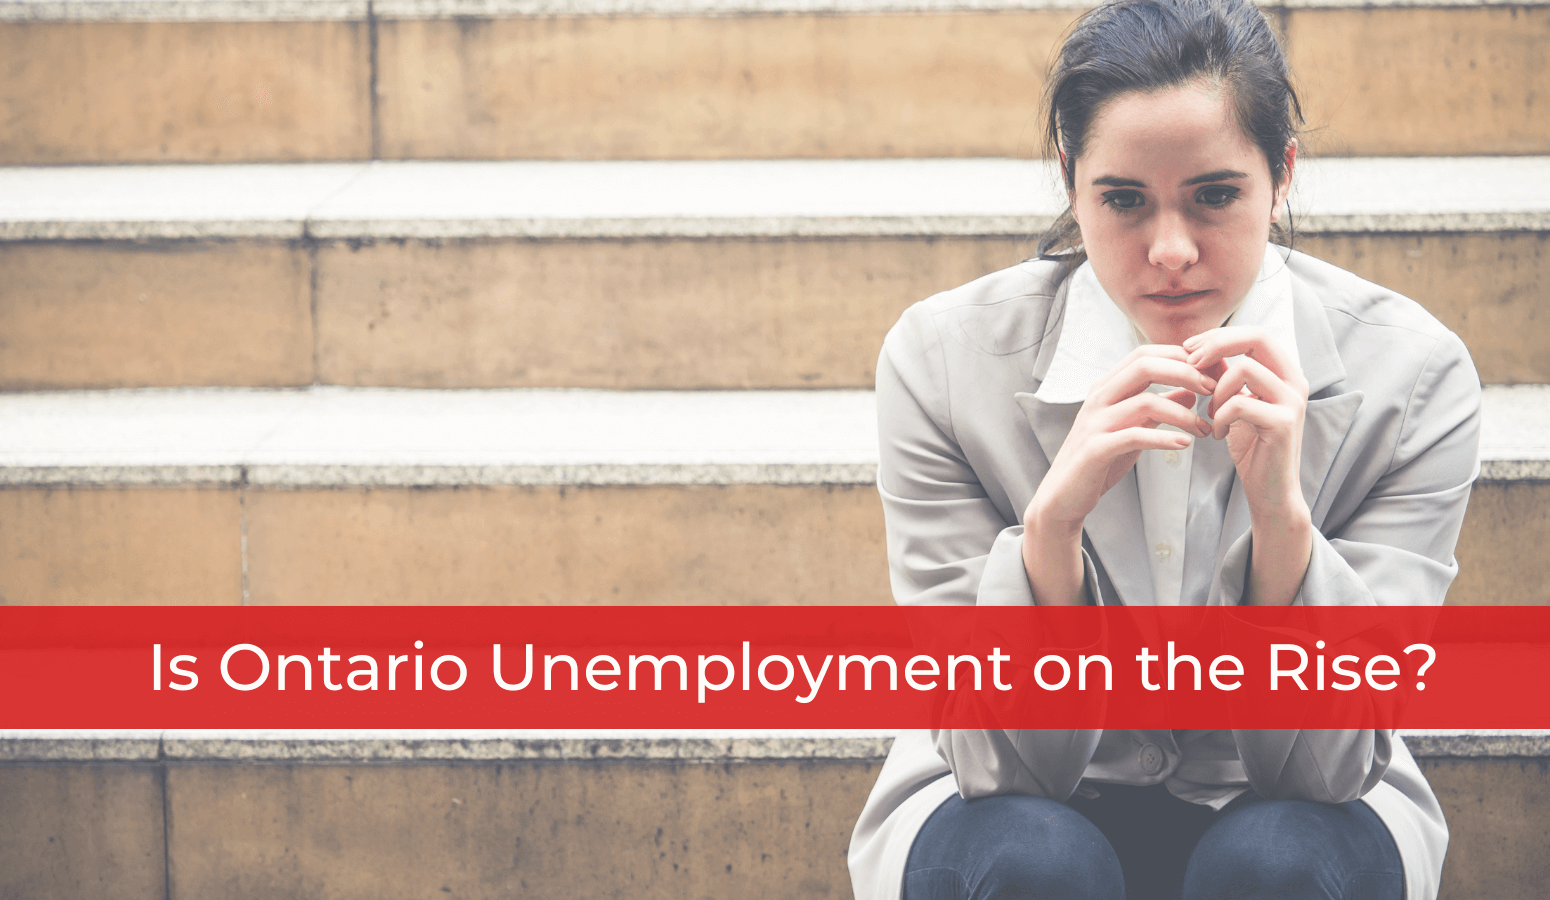 Featured image for “Is Ontario Unemployment on the Rise?”